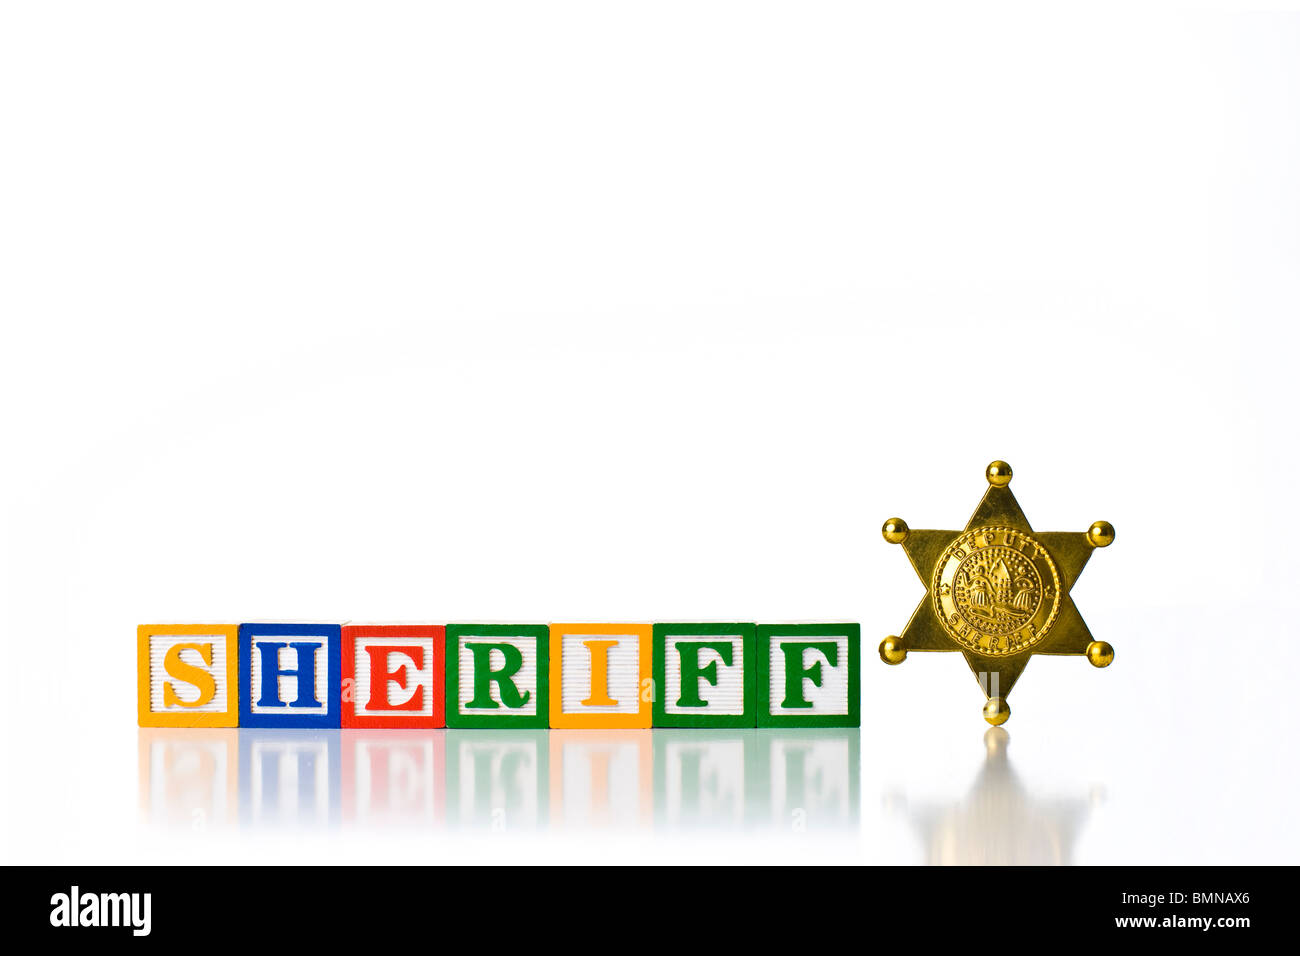 Colorful children's blocks spelling SHERIFF with a badge Stock Photo